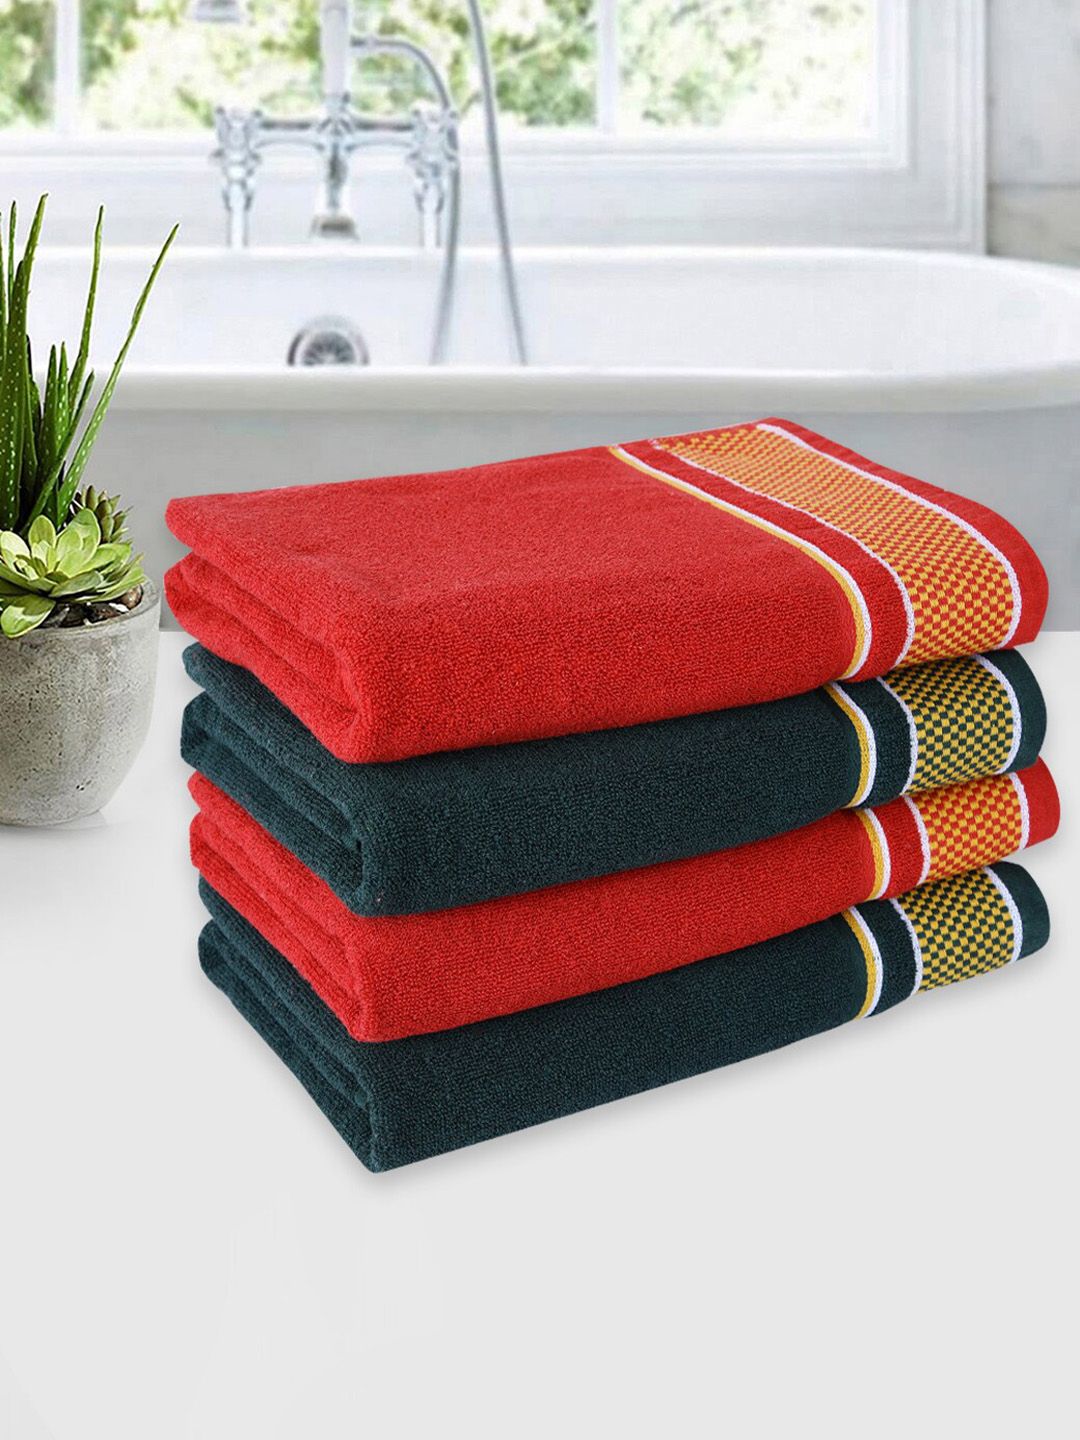 ROMEE Set Of 4 Solid 500 GSM Cotton Bath Towels Price in India